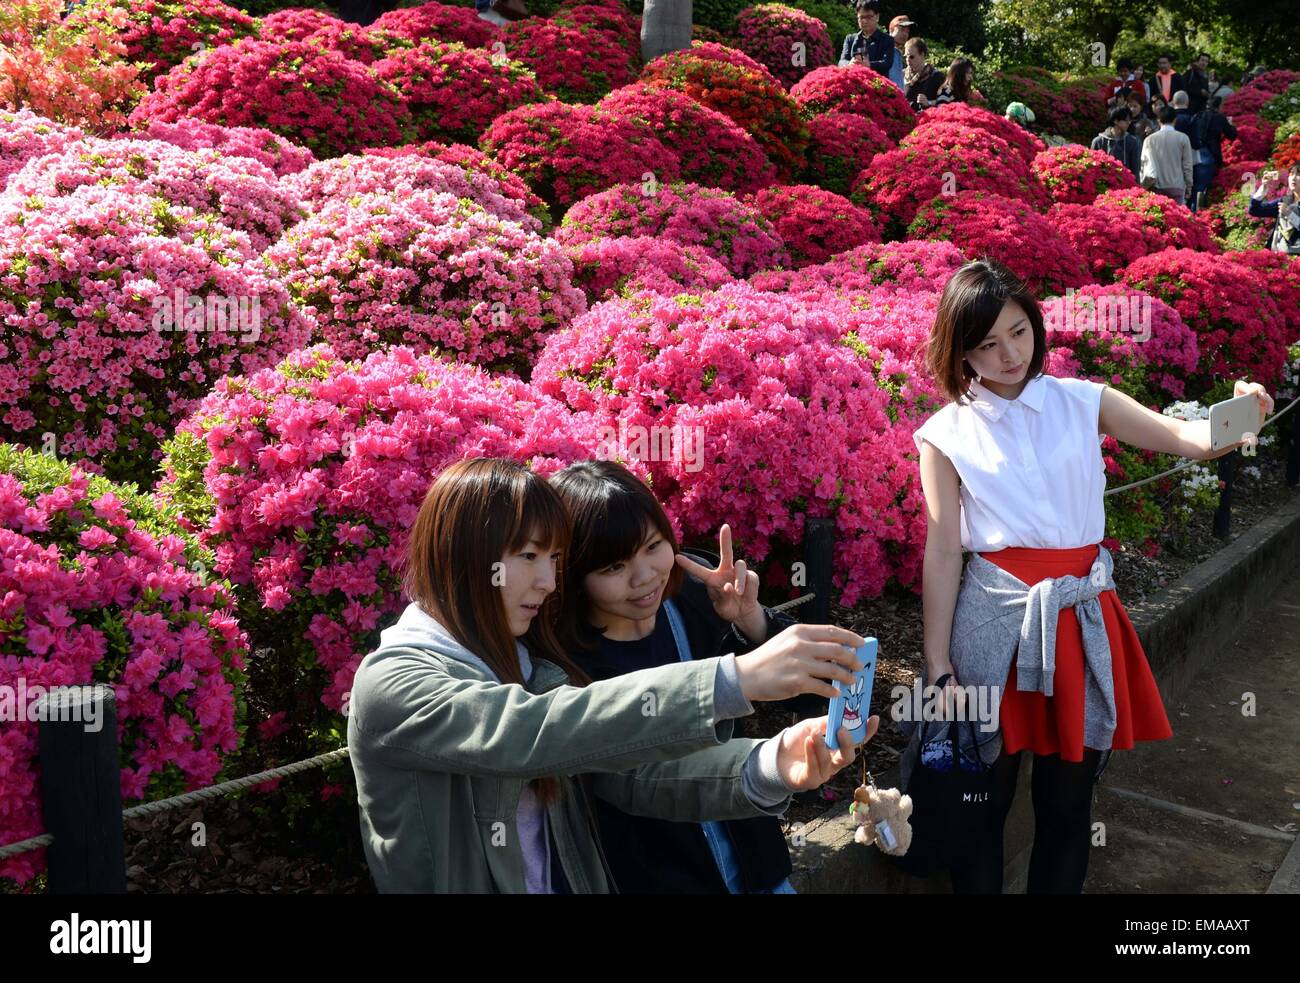 (150418) -- TOKYO, April 18, 2015 (Xinhua) -- Visitors take pictures with Rhododendron flowers at the Nedu Jinja in Tokyo, Japan, April 18, 2015. Around 1000 species of rhododendron are in blossom here. (Xinhua/Ma Ping) (zcc) Stock Photo